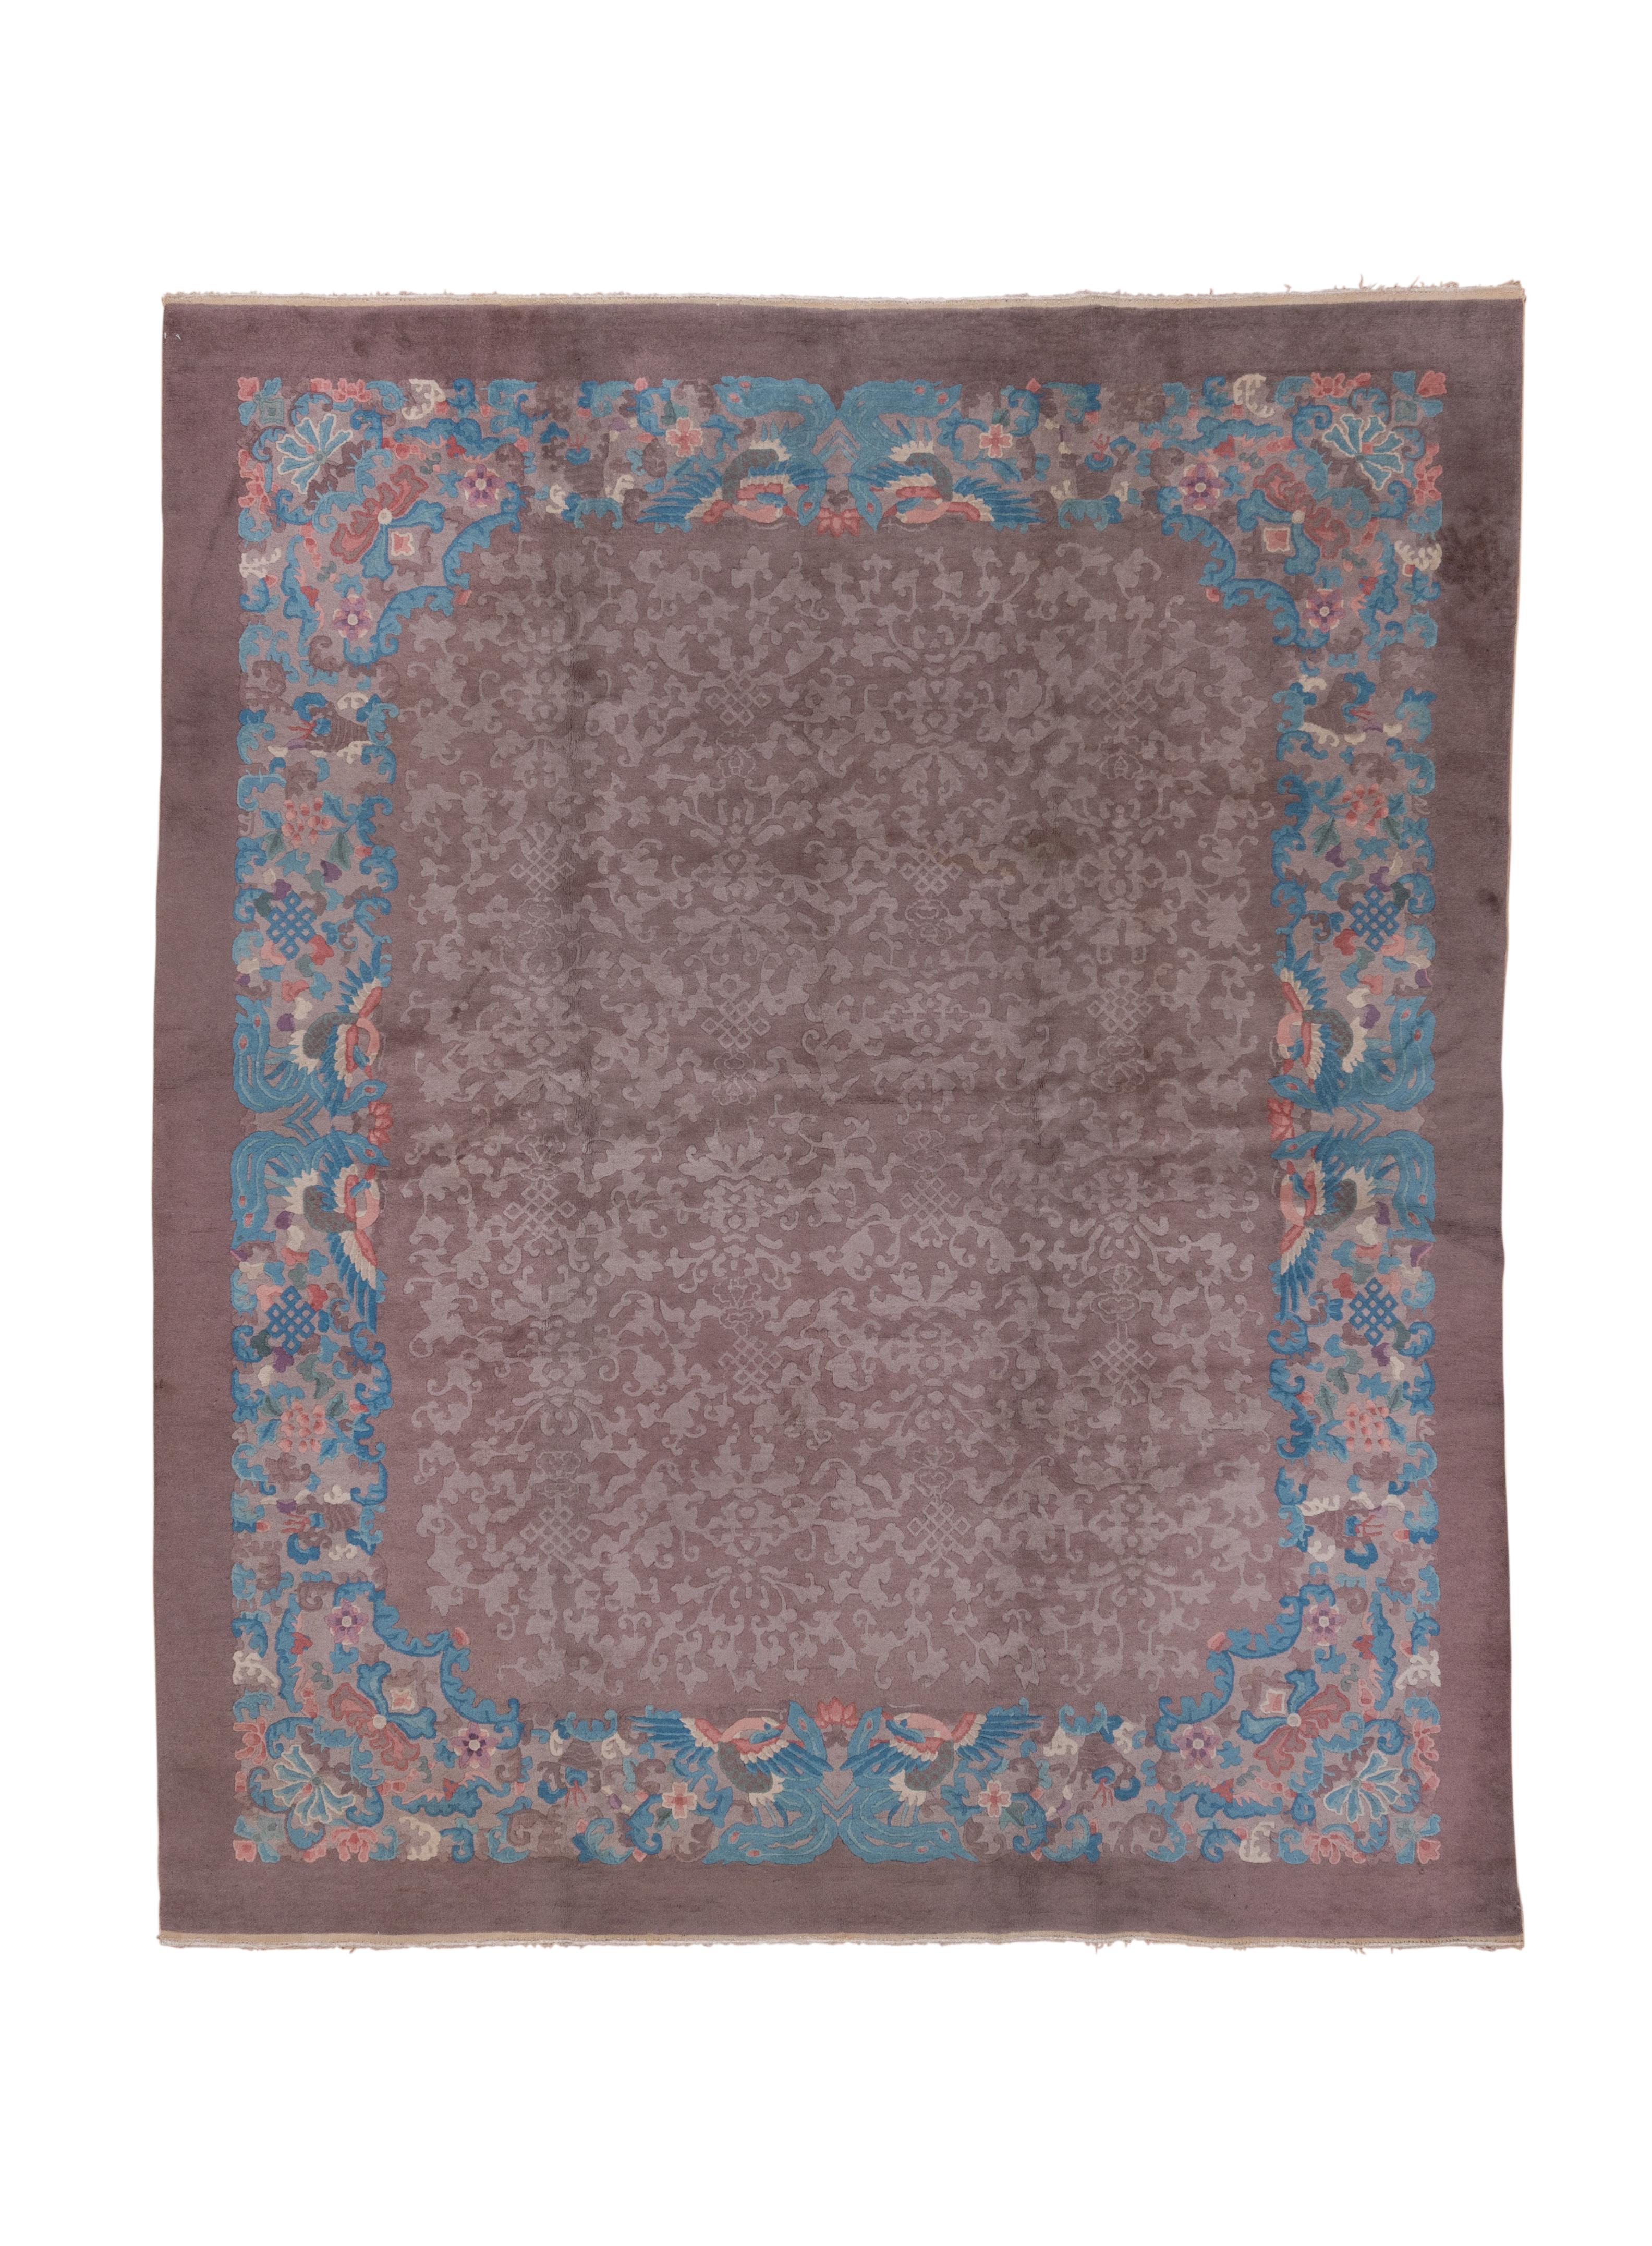 The buff-putty field shows an allover leaf, blossom, knot and cloud band, relaxed tone-on-tone, well contour cut, pattern, within a light blue border of phoenixes, knots and palmettes. Cartouche-shaped field is a Fette trademark. Plain outer coral